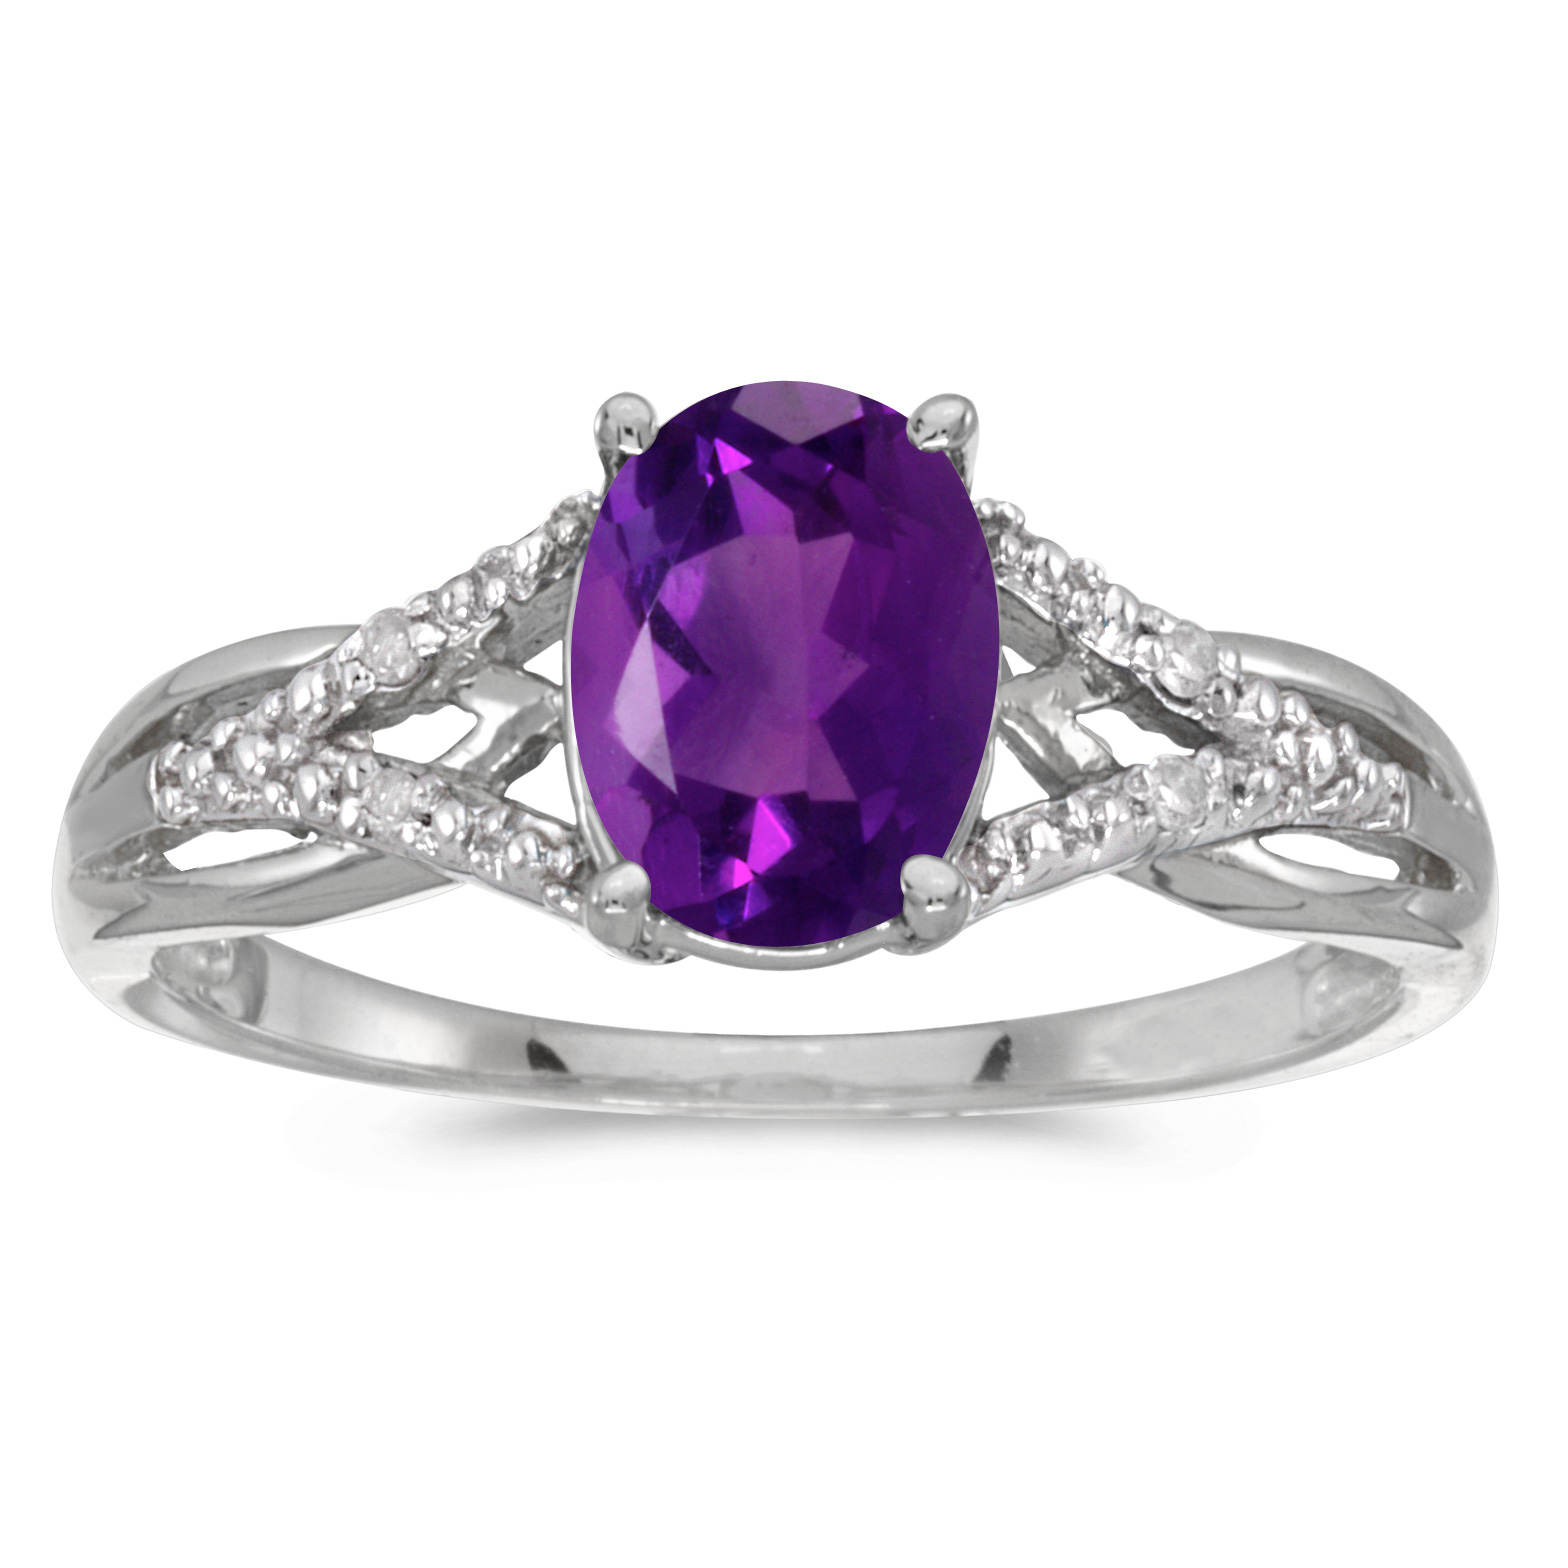 Direct-Jewelry 14k White Gold Oval Amethyst And Diamond Ring